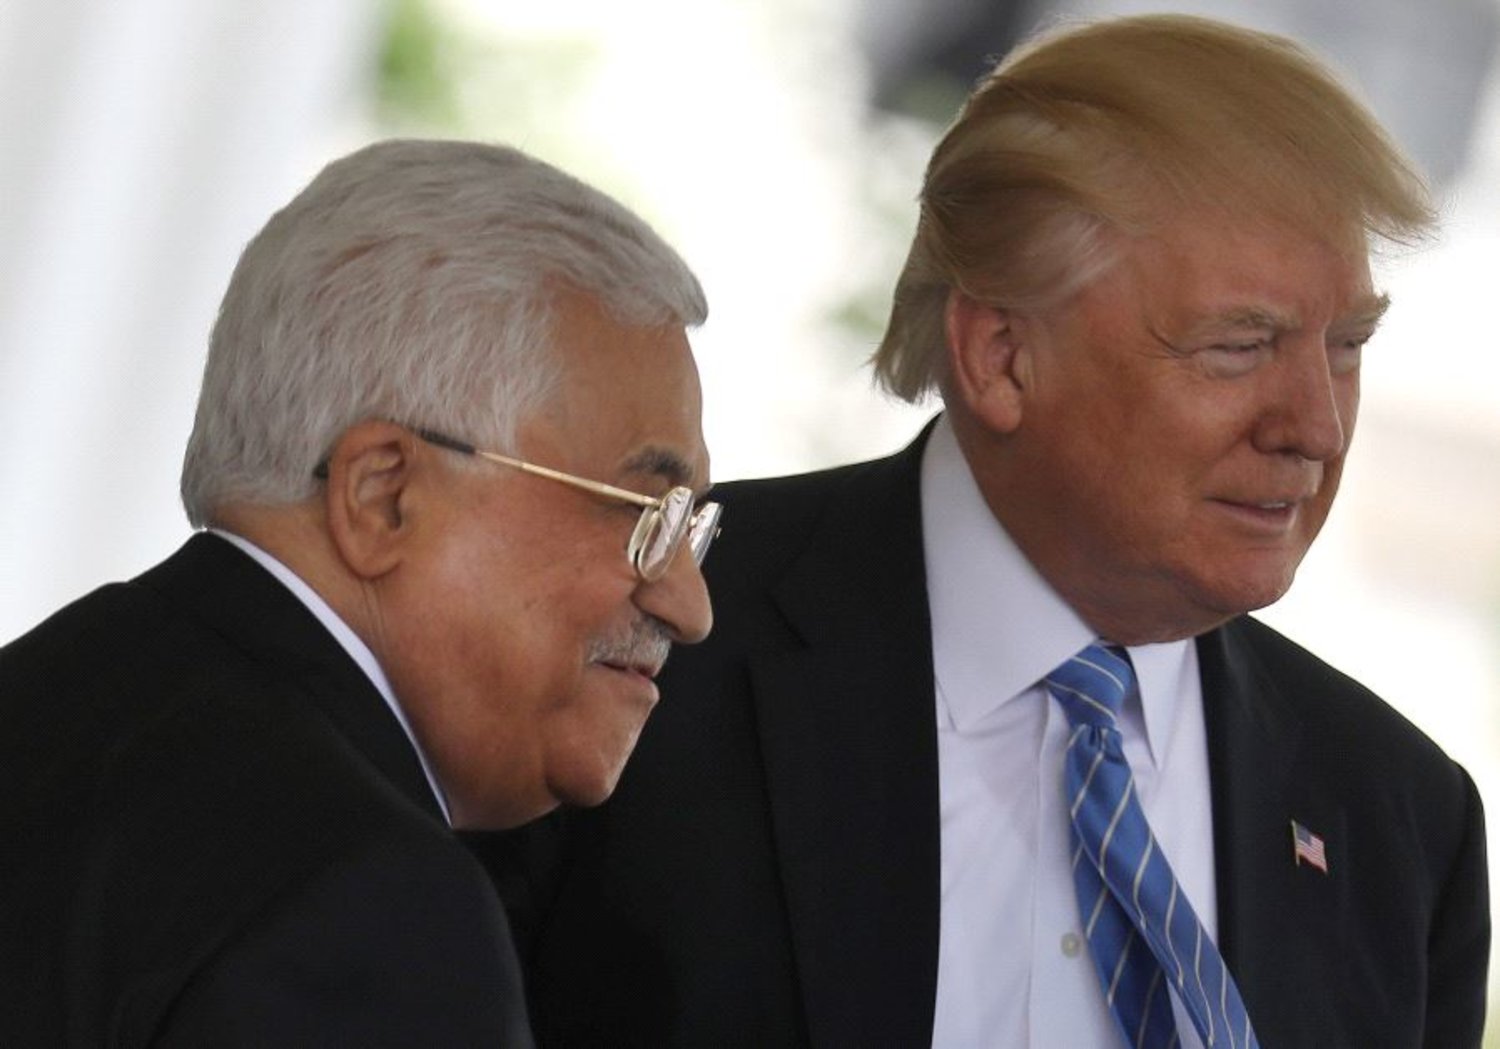 US President Donald Trump welcomes Palestinian President Mahmoud Abbas to White House in Washington, May 3, 2017. (REUTERS)